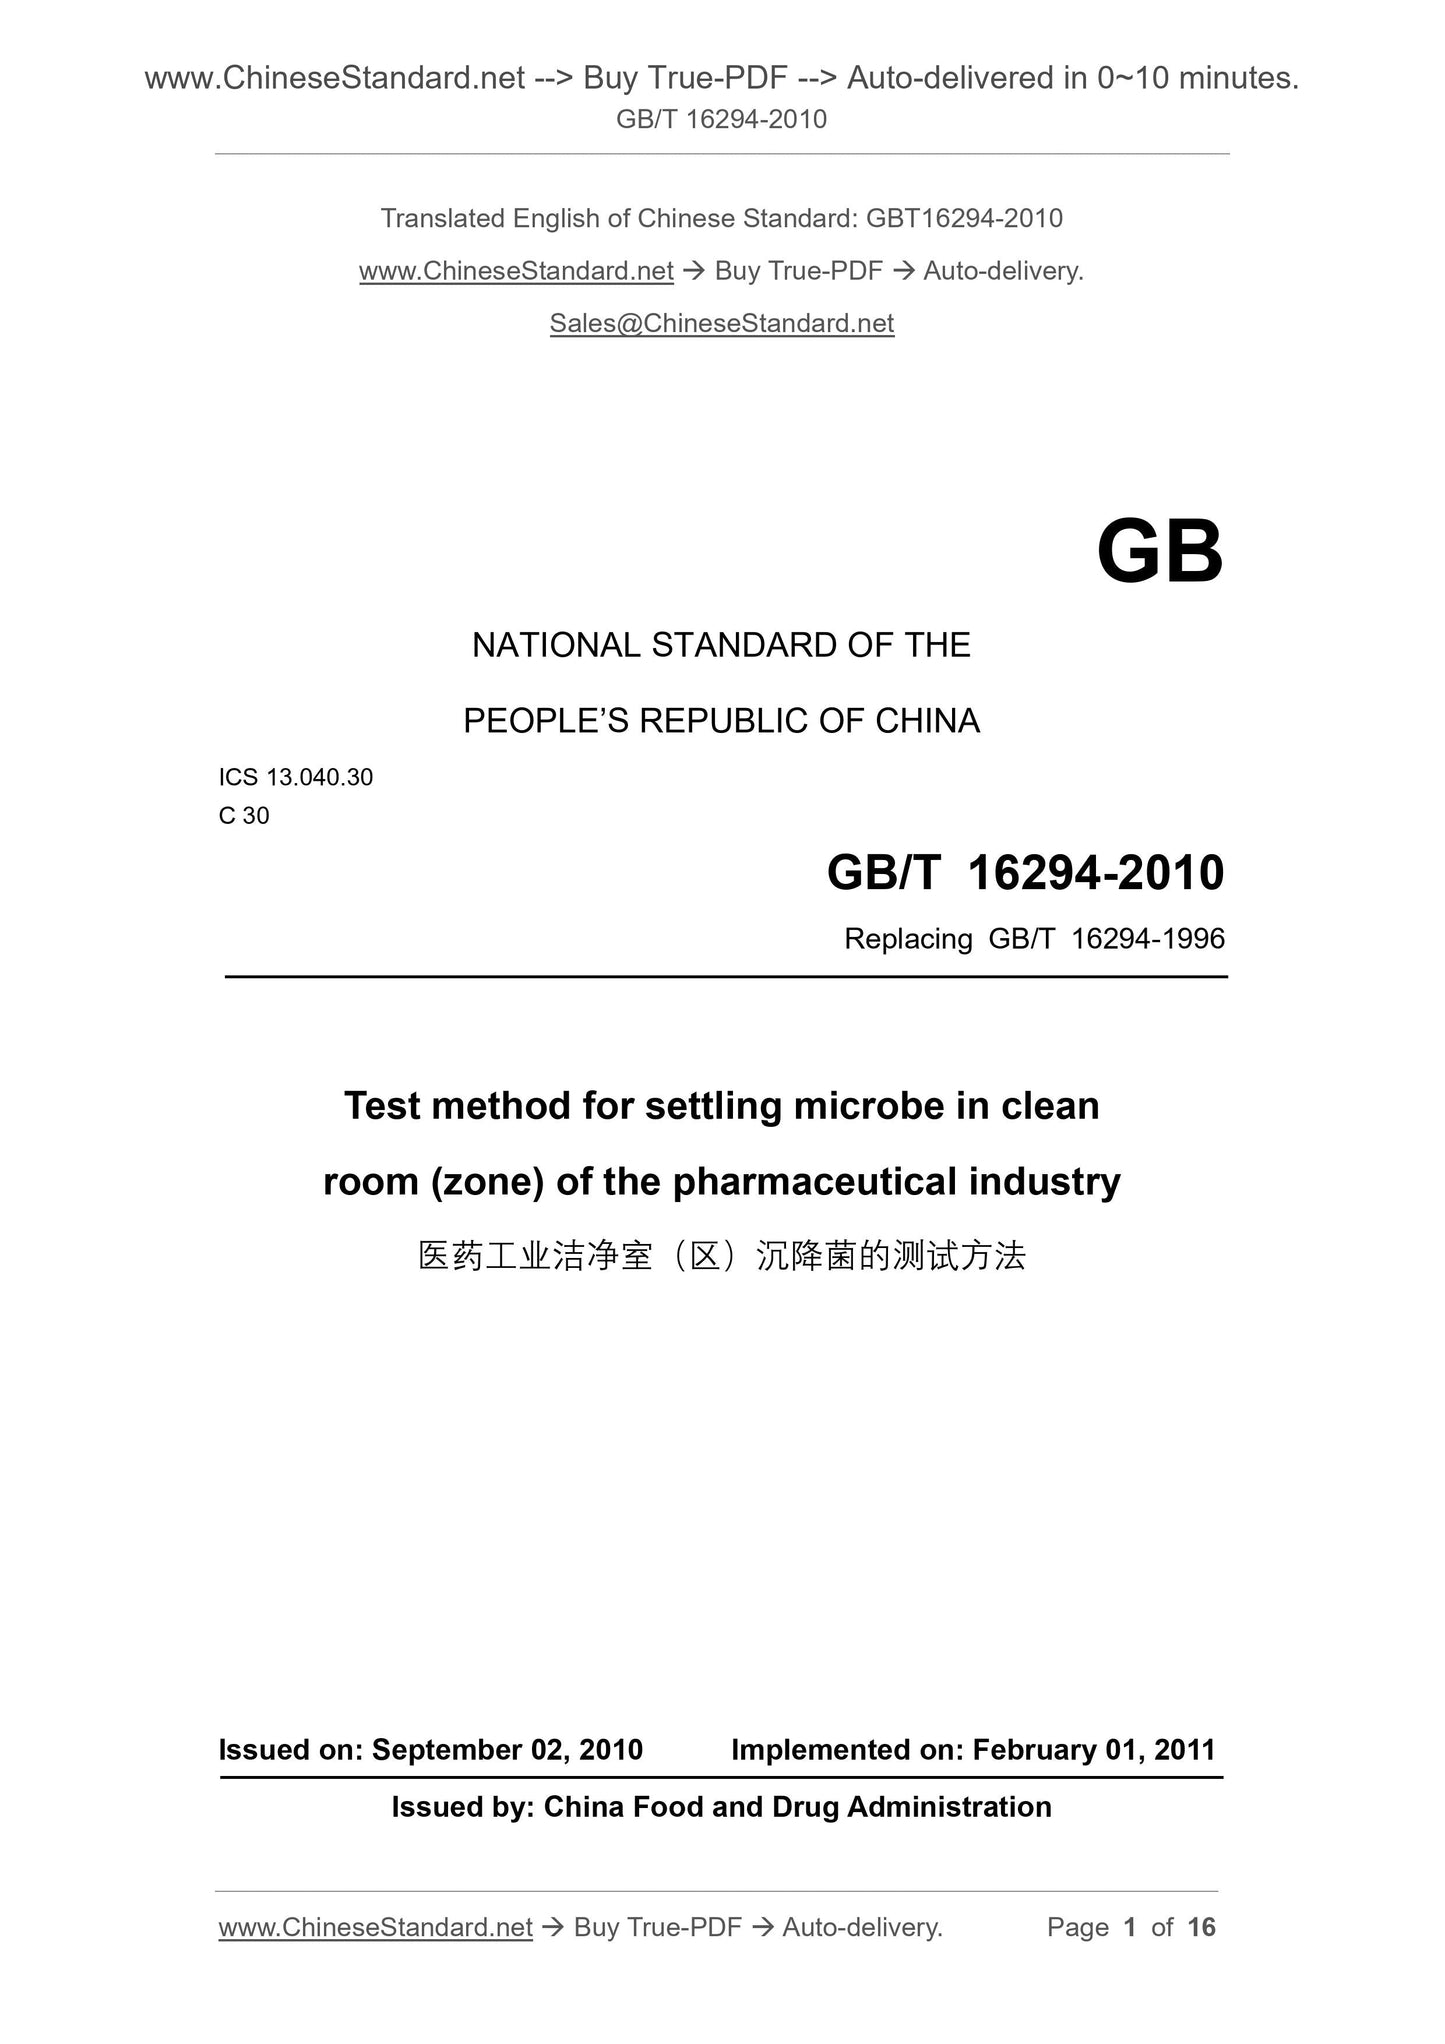 GB/T 16294-2010 Page 1